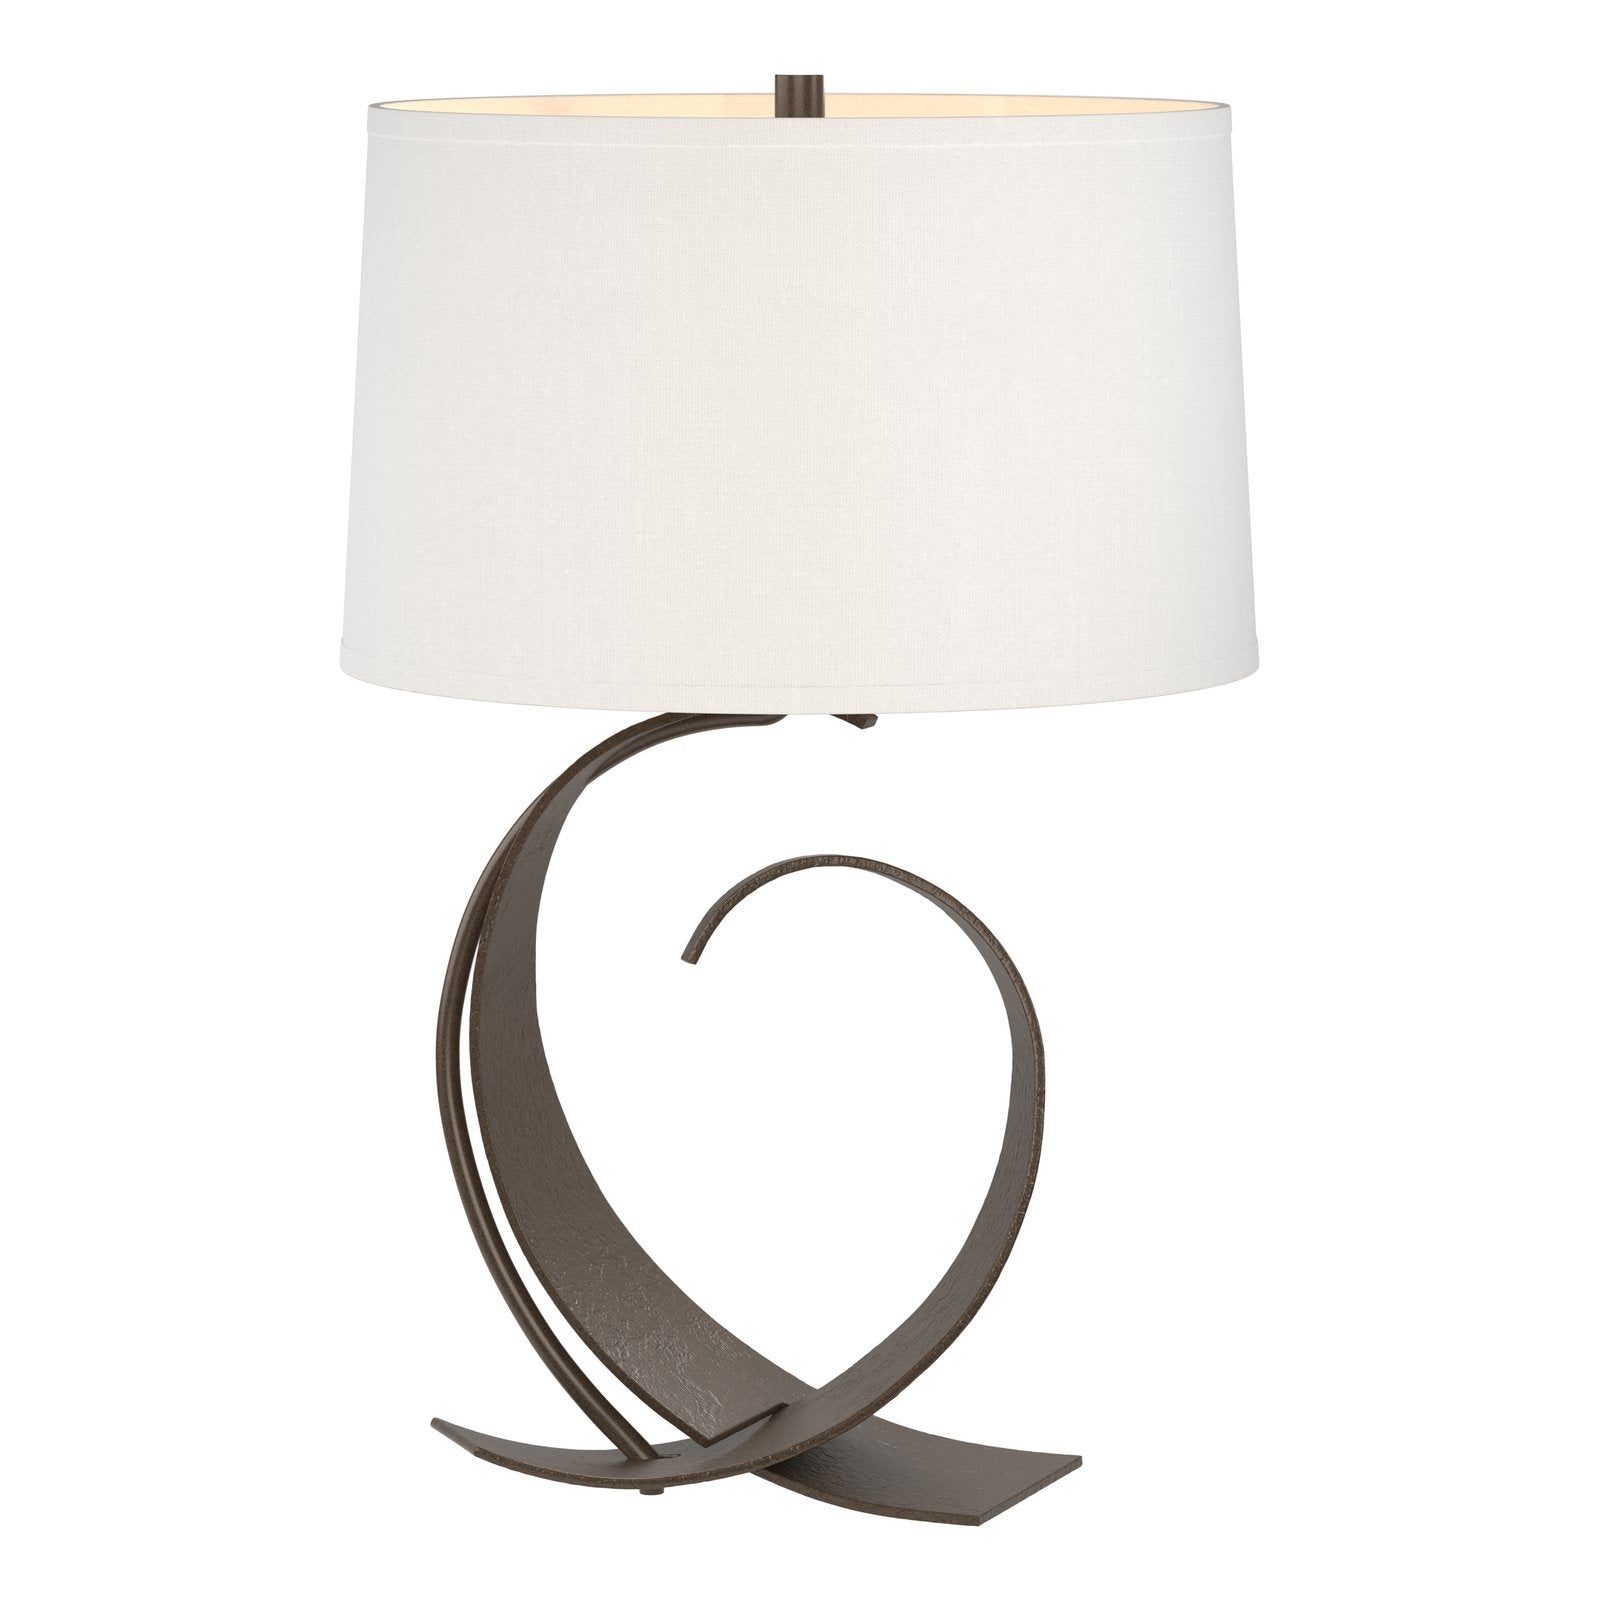 Fullered Impressions Table Lamp Lamp Hubbardton Forge Bronze 14x22.1 Natural